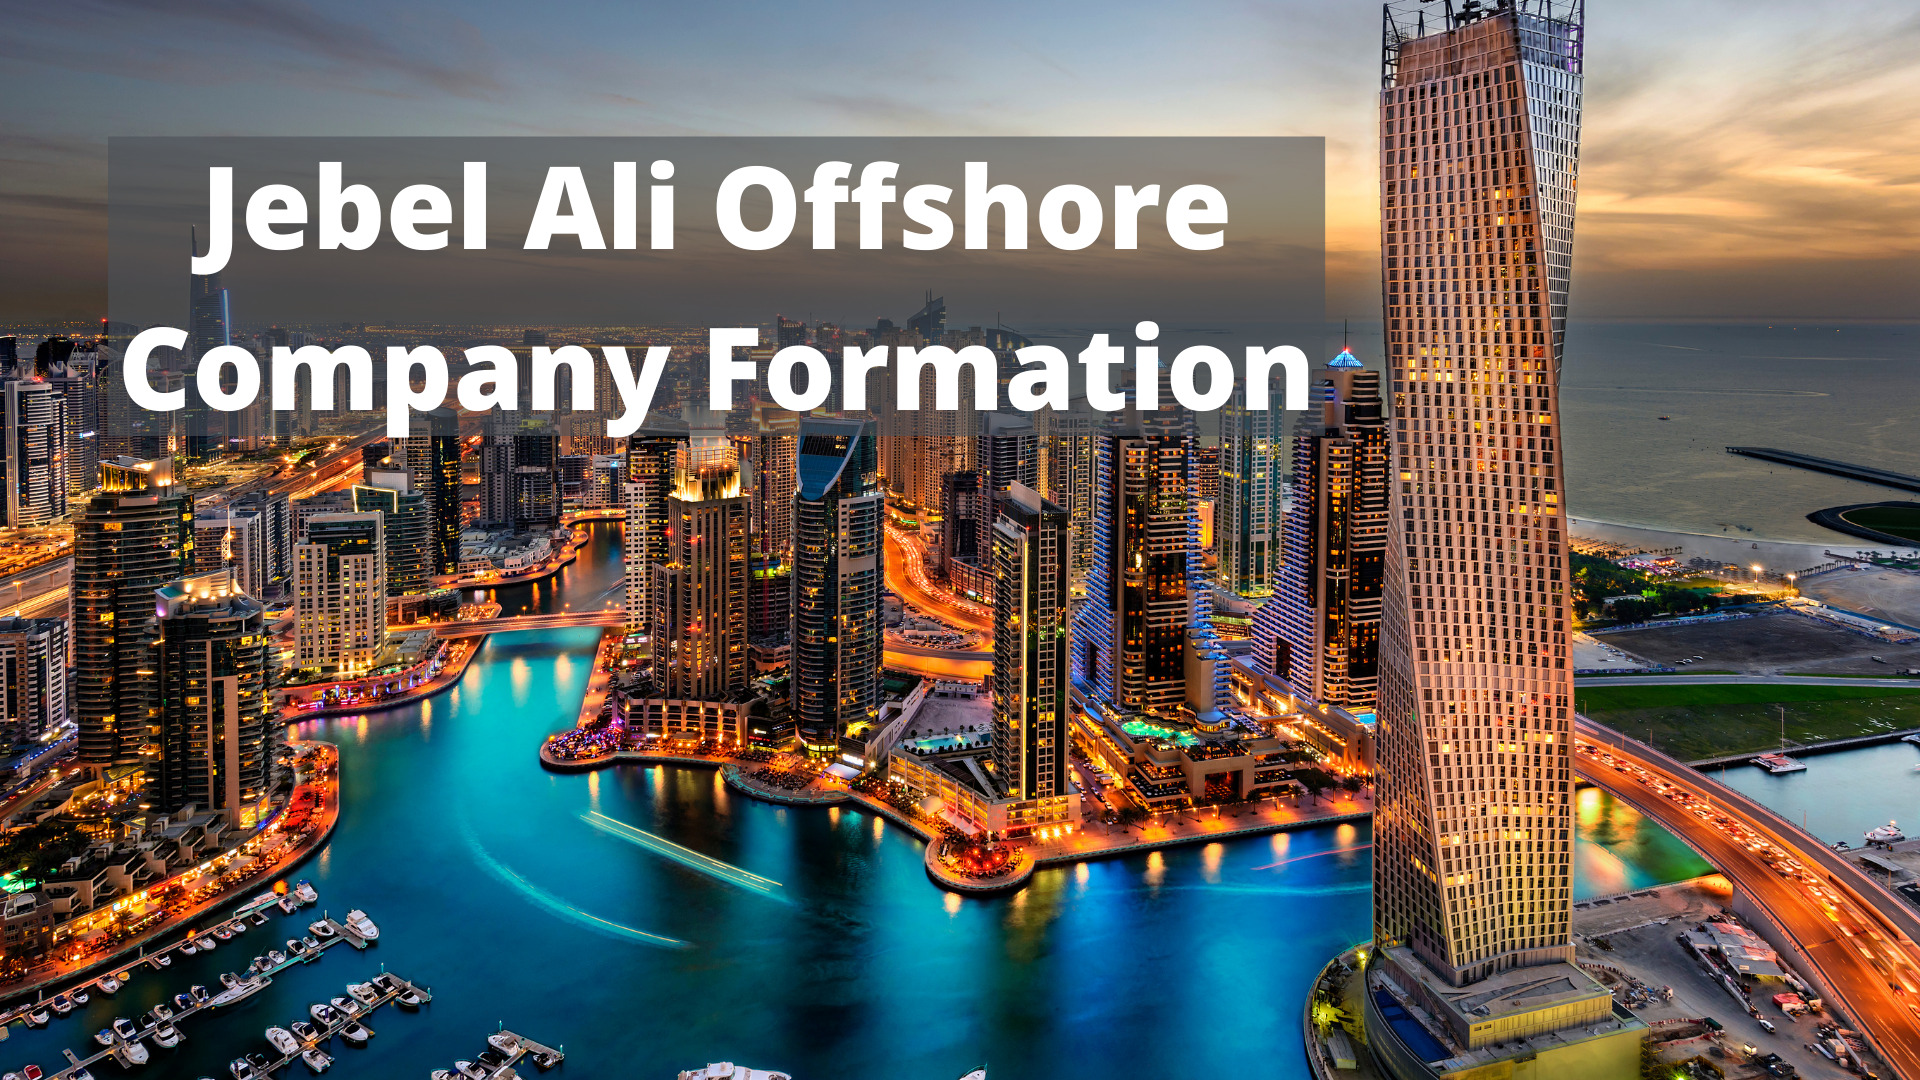 Jebel Ali Offshore Company Formation​